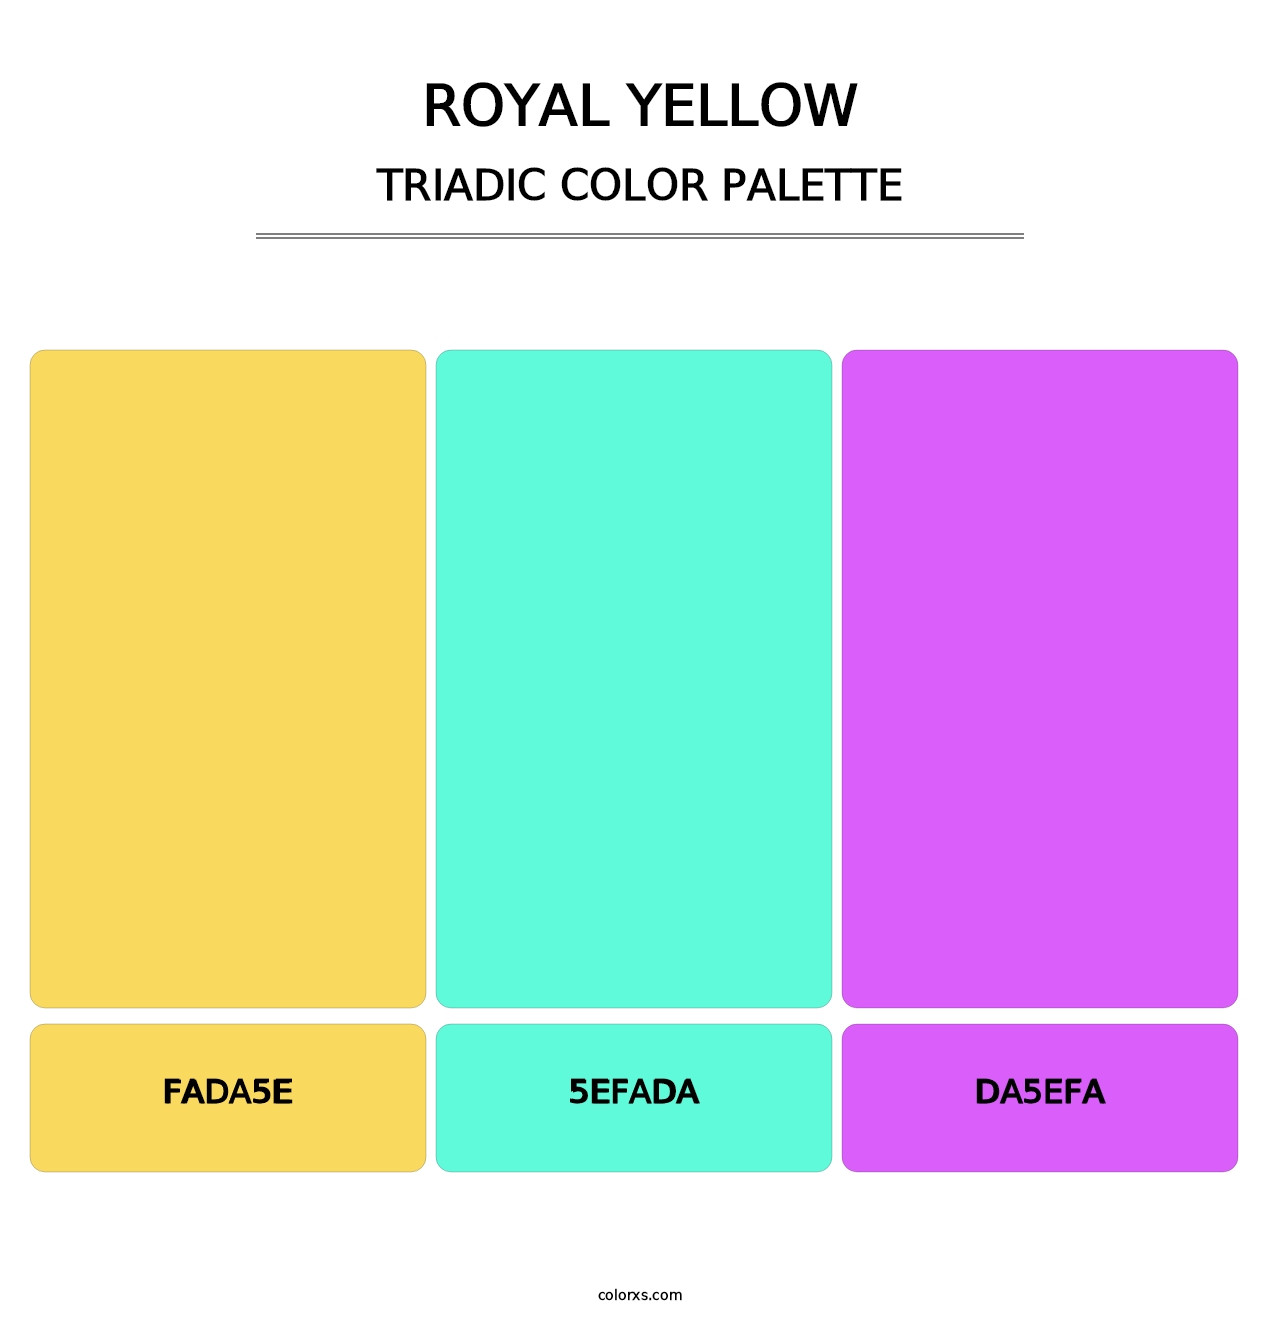 Royal Yellow - Triadic Color Palette